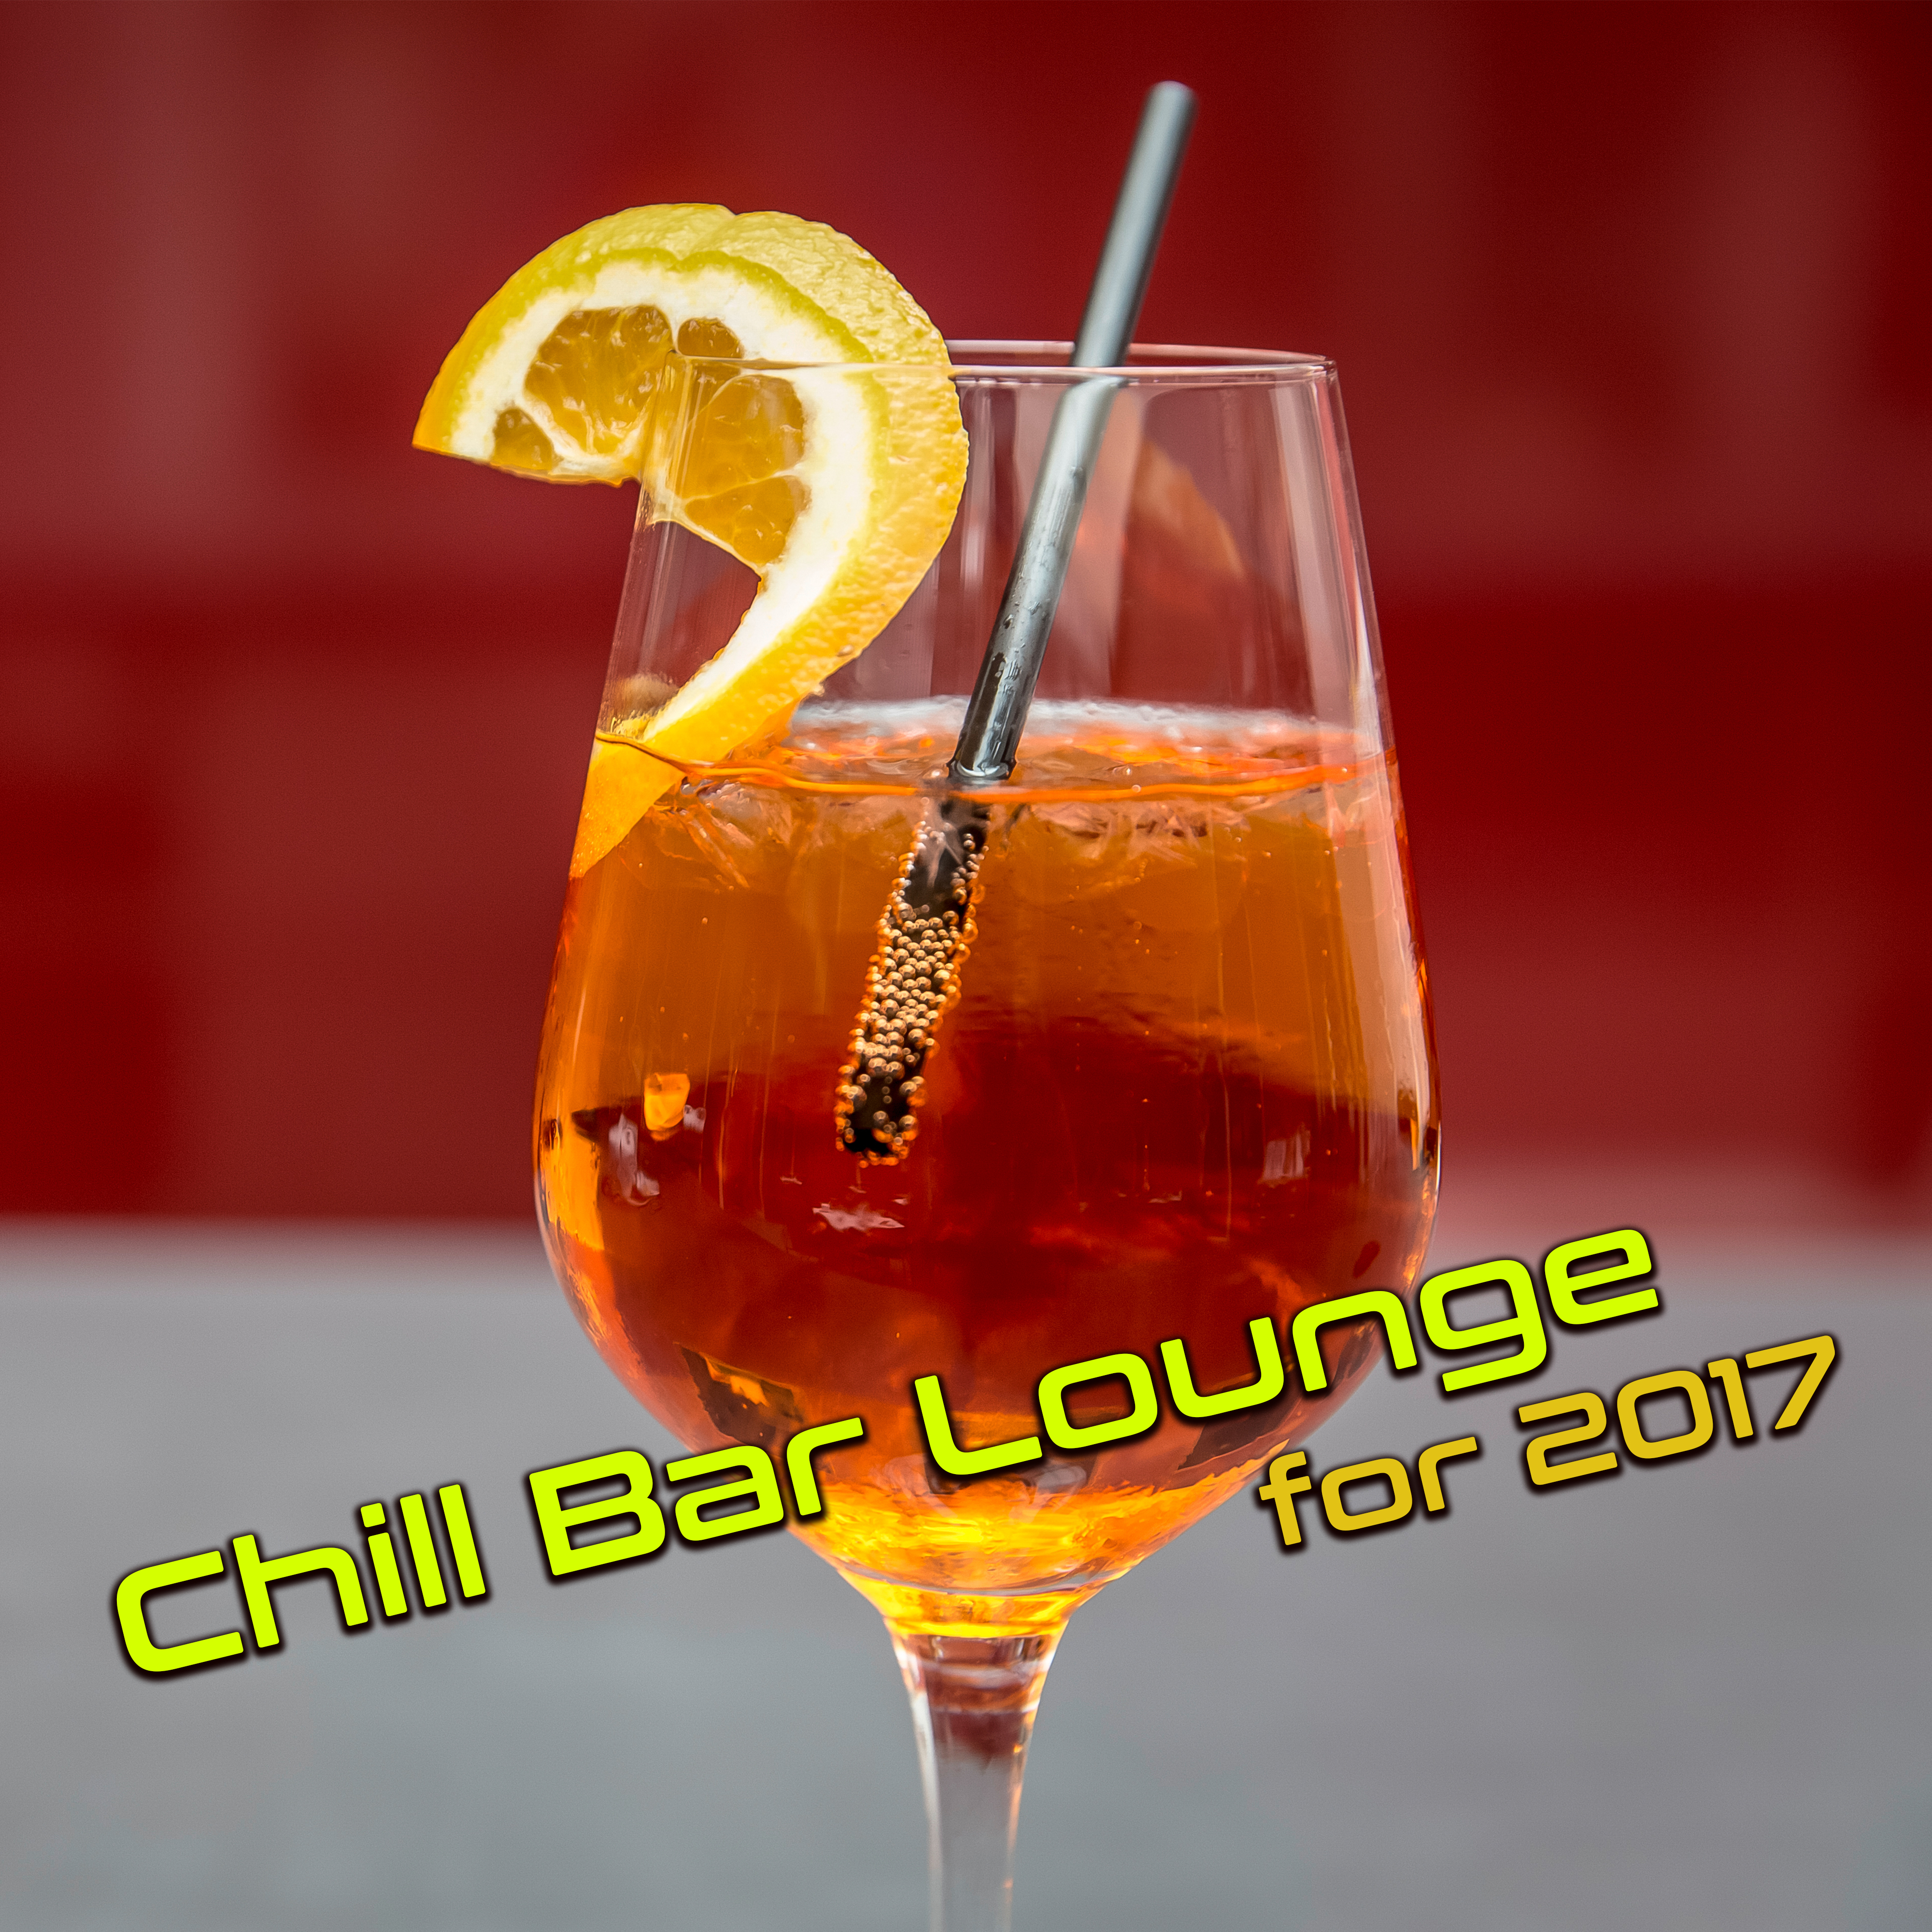 Chill Bar Lounge for 2017  Best Holiday Chill Out Music, Relax on the Beach, Ambient Music, Ibiza Chill, Drink Bar, Cocktails  Drinks